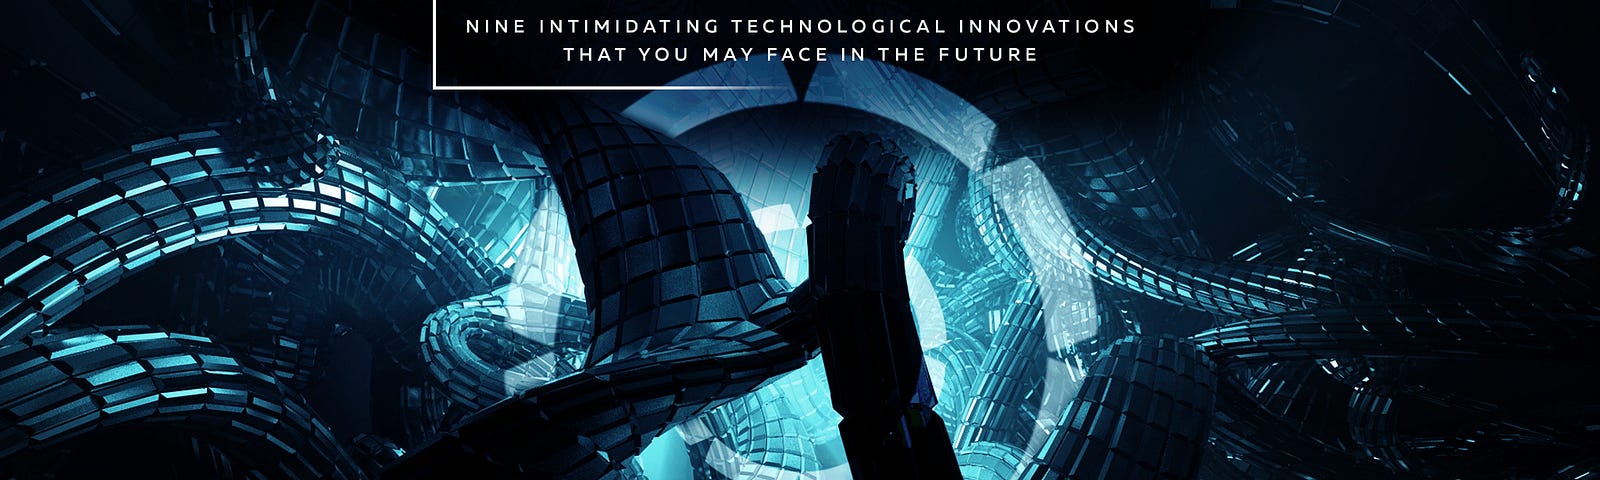 Nine Intimidating Technological Innovations that You May Face in the Future. Part 3